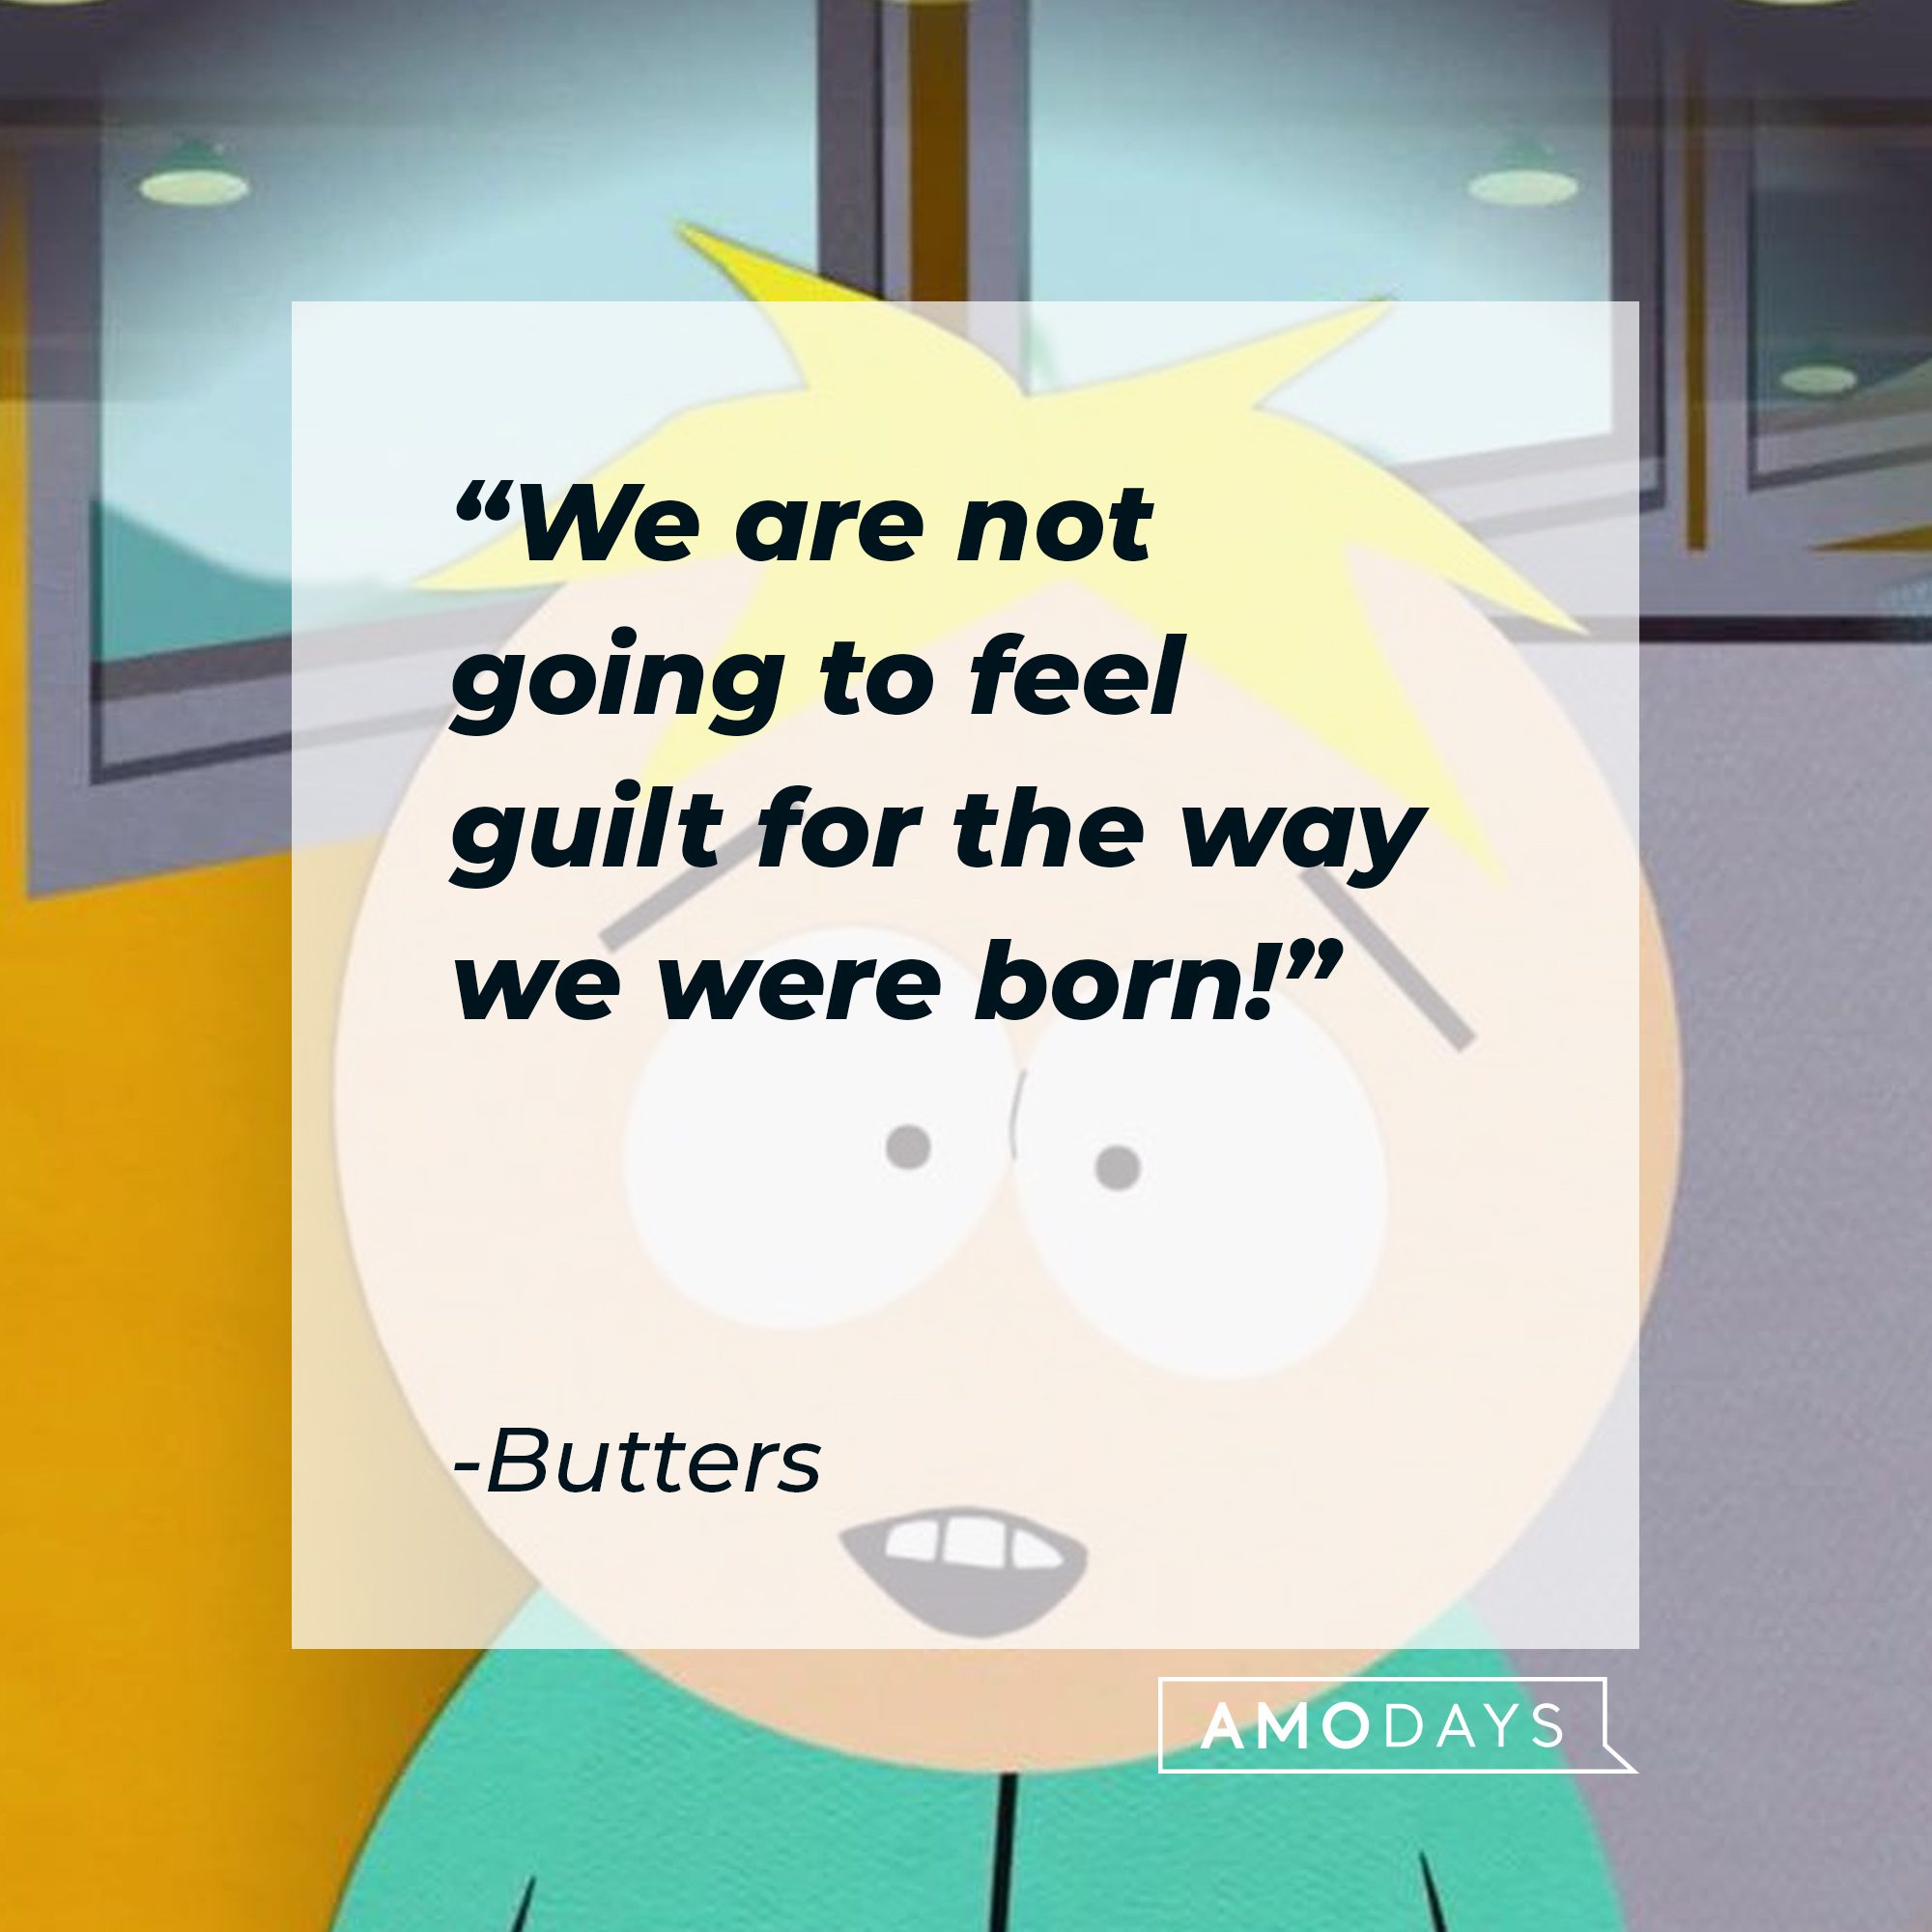 Butters' quote: "We are not going to feel guilt for the way we were born!" | Source: facebook.com/southpark